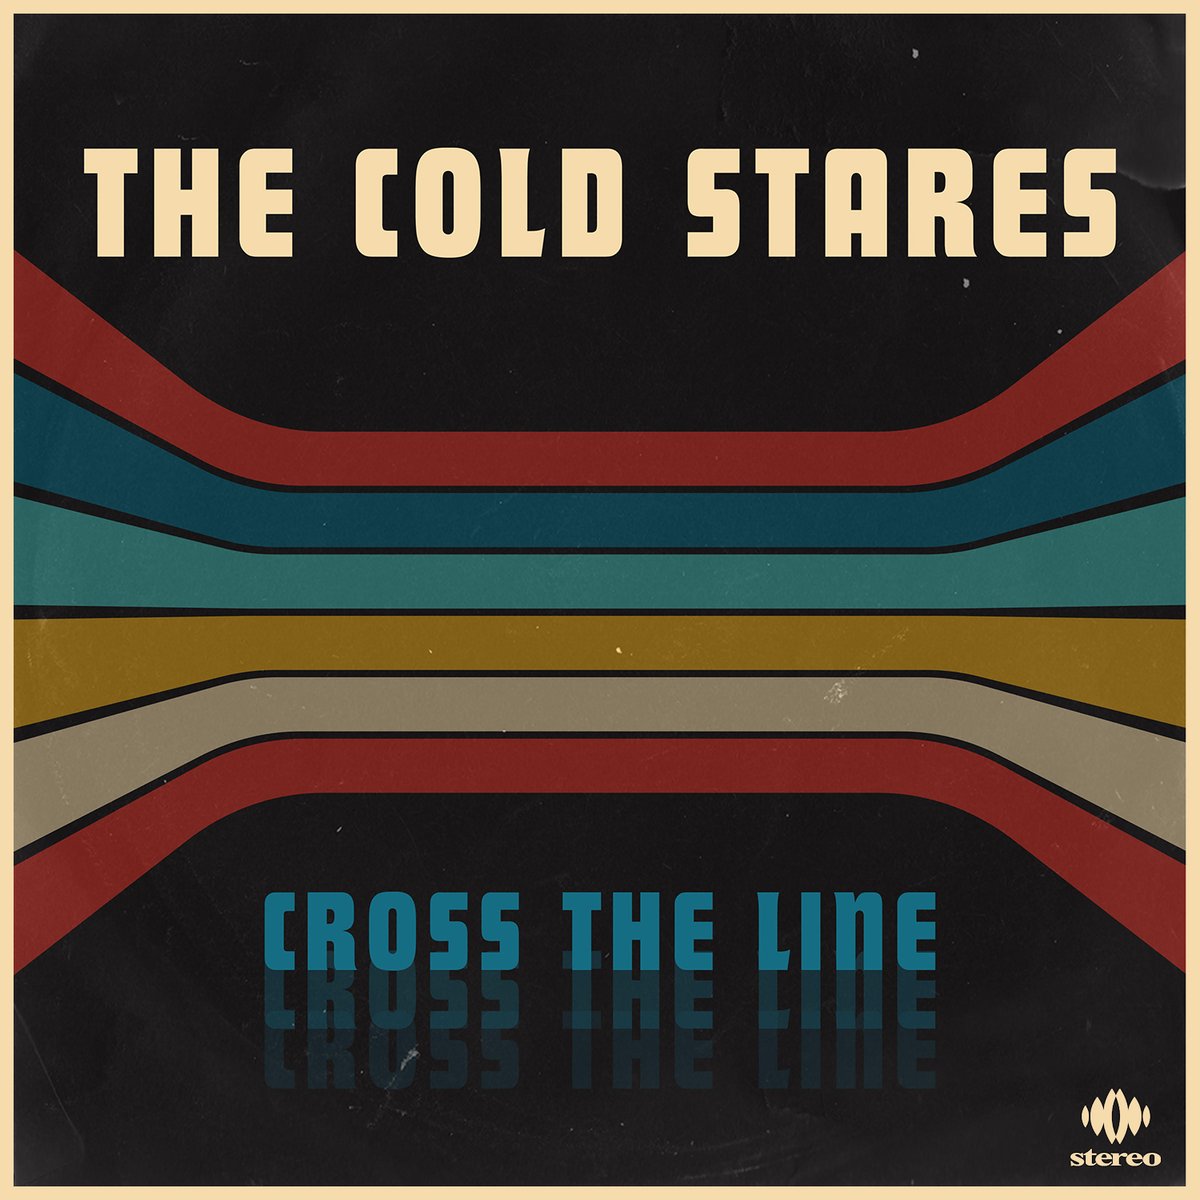 The latest single from The Cold Stares, Cross The Line, is out now! Available to stream on all platforms! 🎵 Listen here: lnk.to/TCScrosstheline #thecoldstares #newmusic #rock #mascotrecords